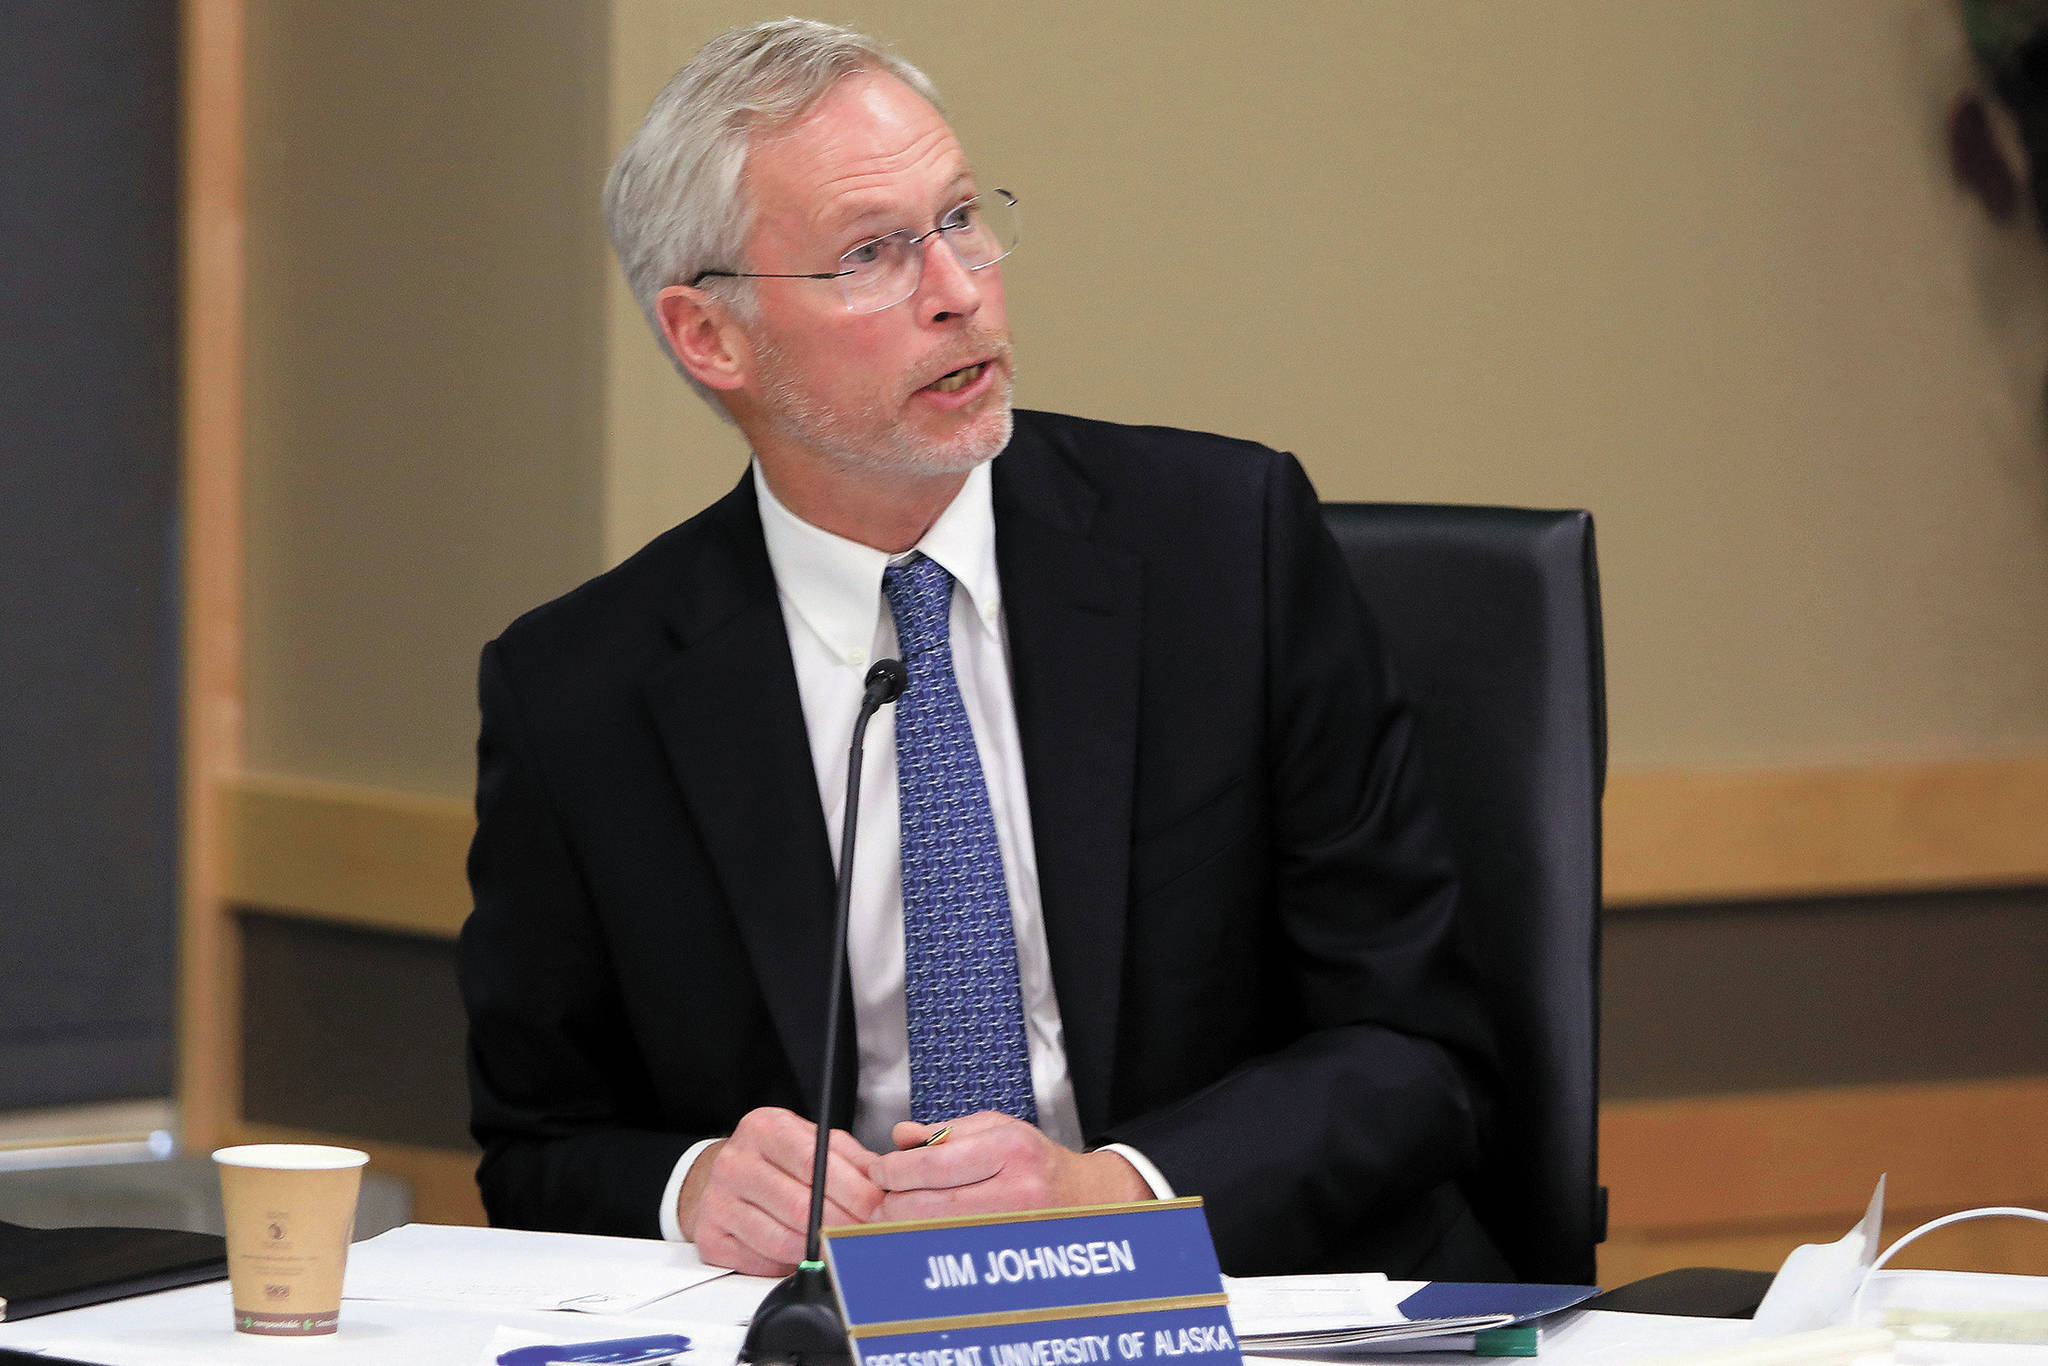 In this July 30, 2019, file photo, University of Alaska President Jim Johnsen speaks at a meeting in Anchorage, Alaska. Johnsen, the embattled University of Alaska president, has resigned, the university announced Monday, June 22, 2020. The change in leadership was a mutual decision made after Johnsen consulted with the Board of Regents, according to a statement. His biography was immediately removed from the university’s web page. (AP Photo/Dan Joling, File)